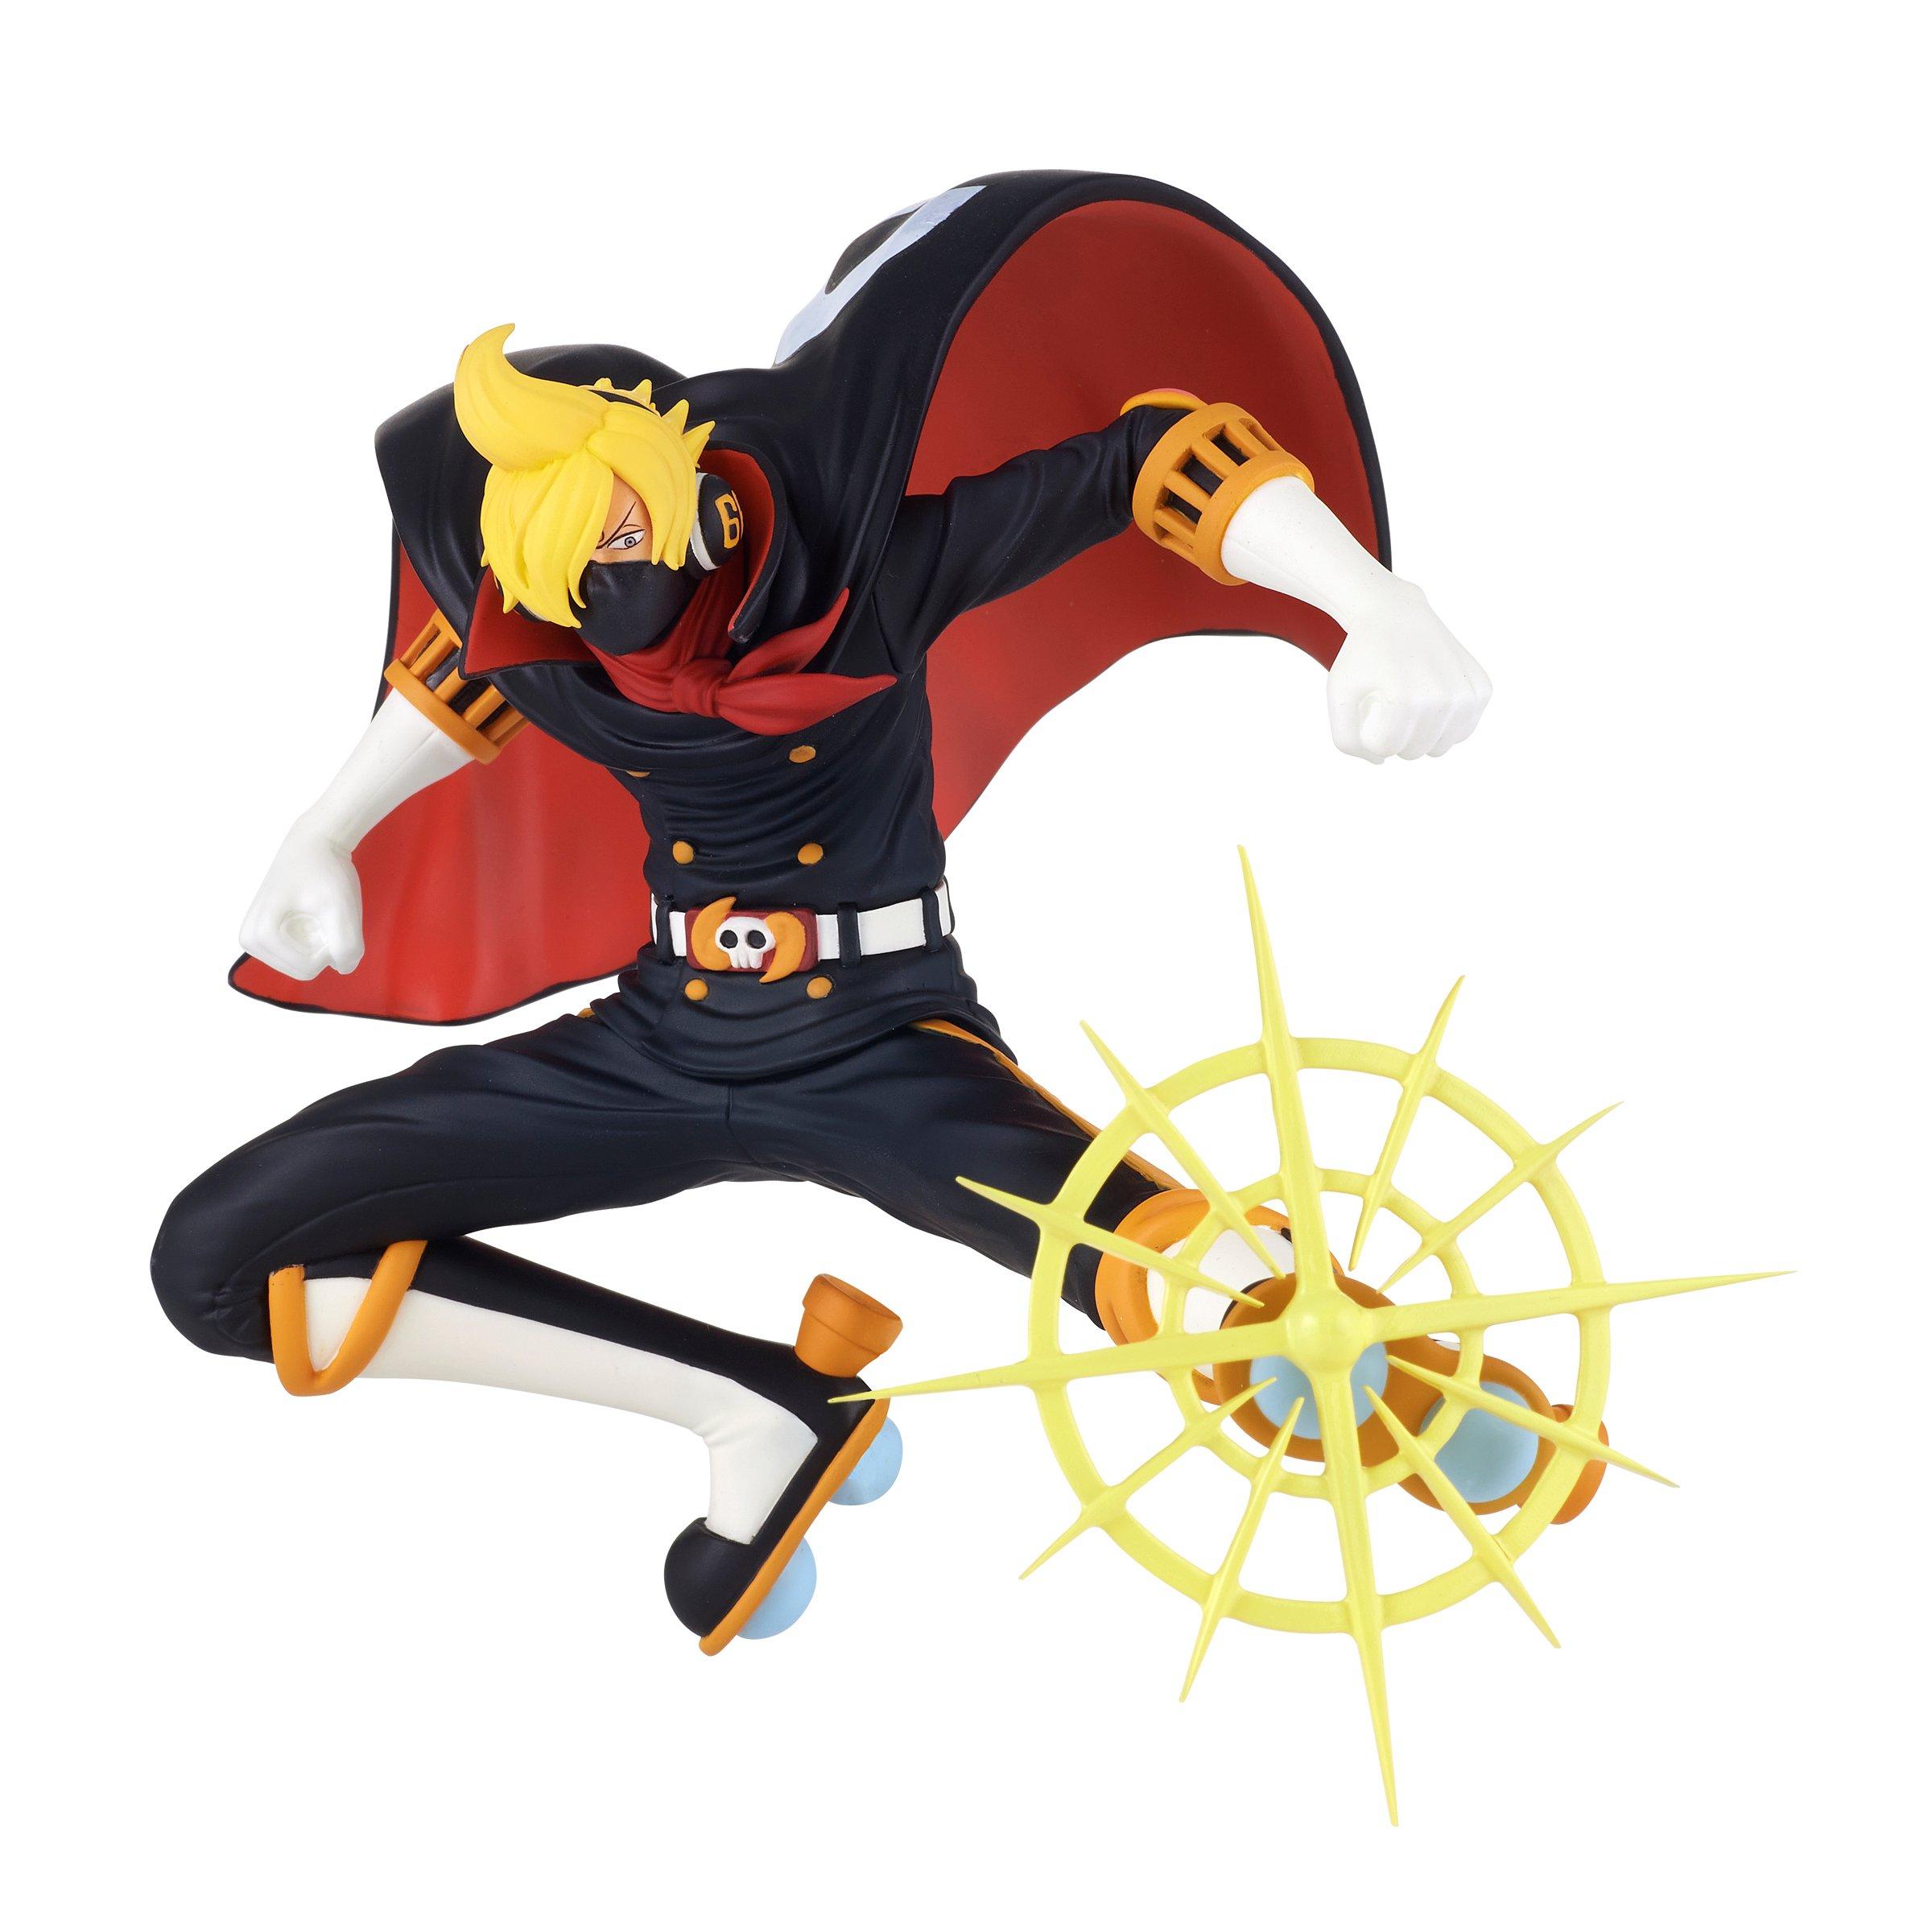 Action Figure: One piece - Vinsmoke Sanji Battle Record Collection